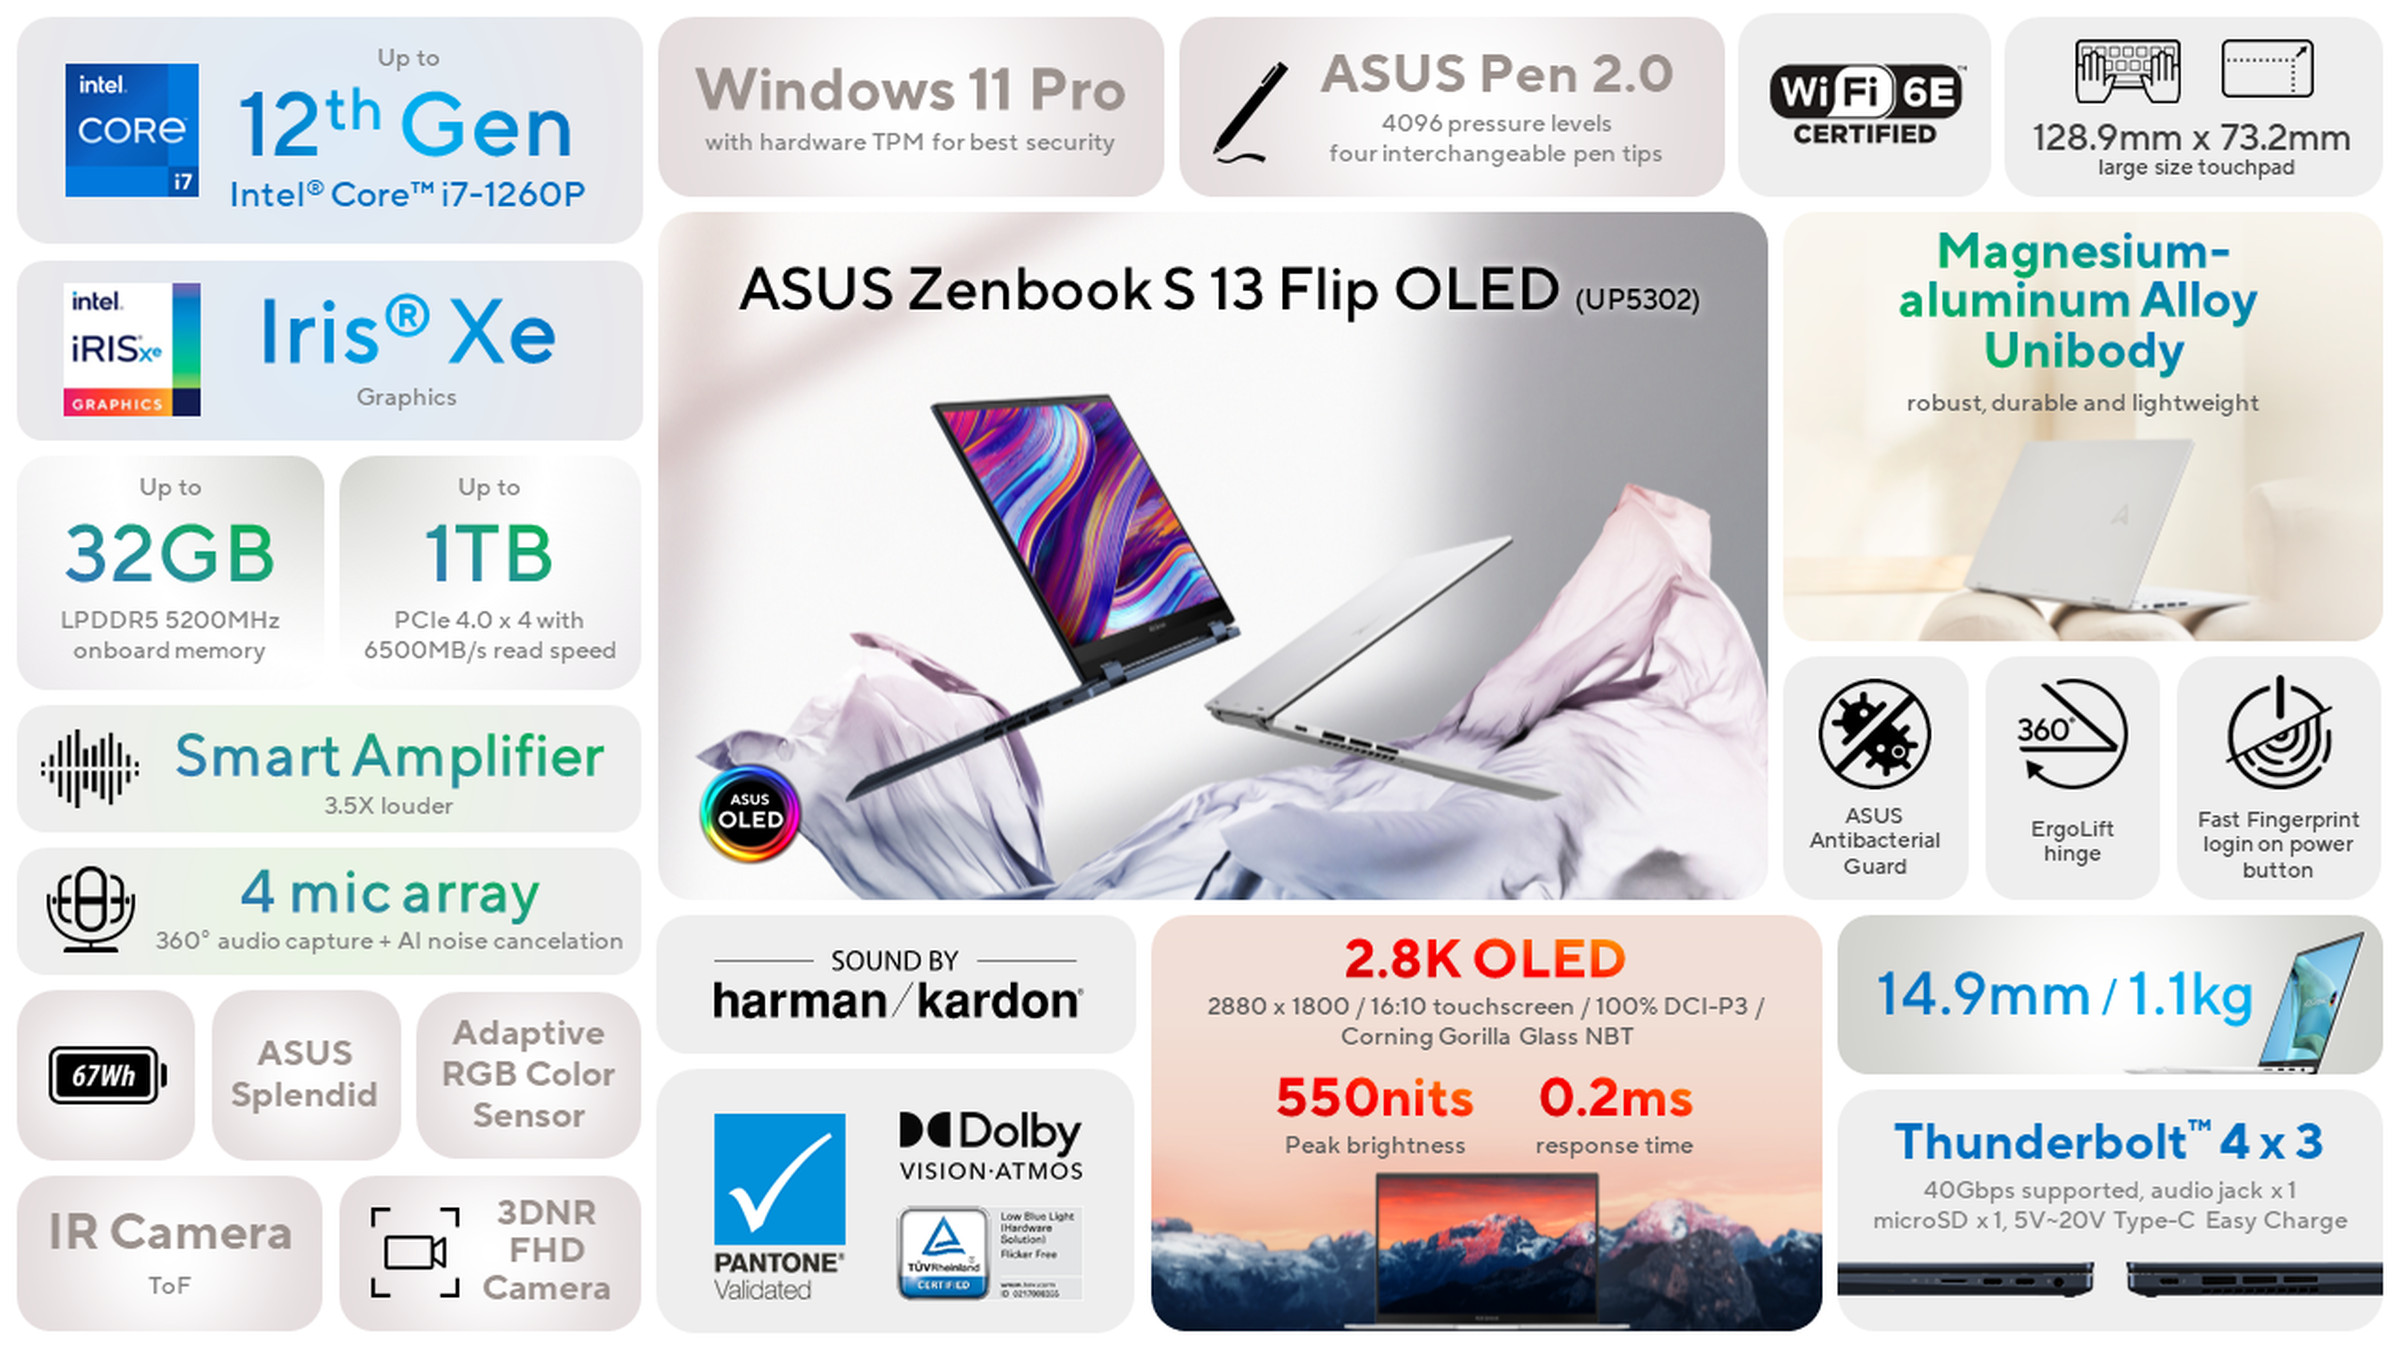 The Asus Zenbook S 13 Flip OLED has an i7-1260P, also with 13.3-inch 2.8K OLED at 14.9mm thick, 67Wh battery, and three Thunderbolt 4 ports.